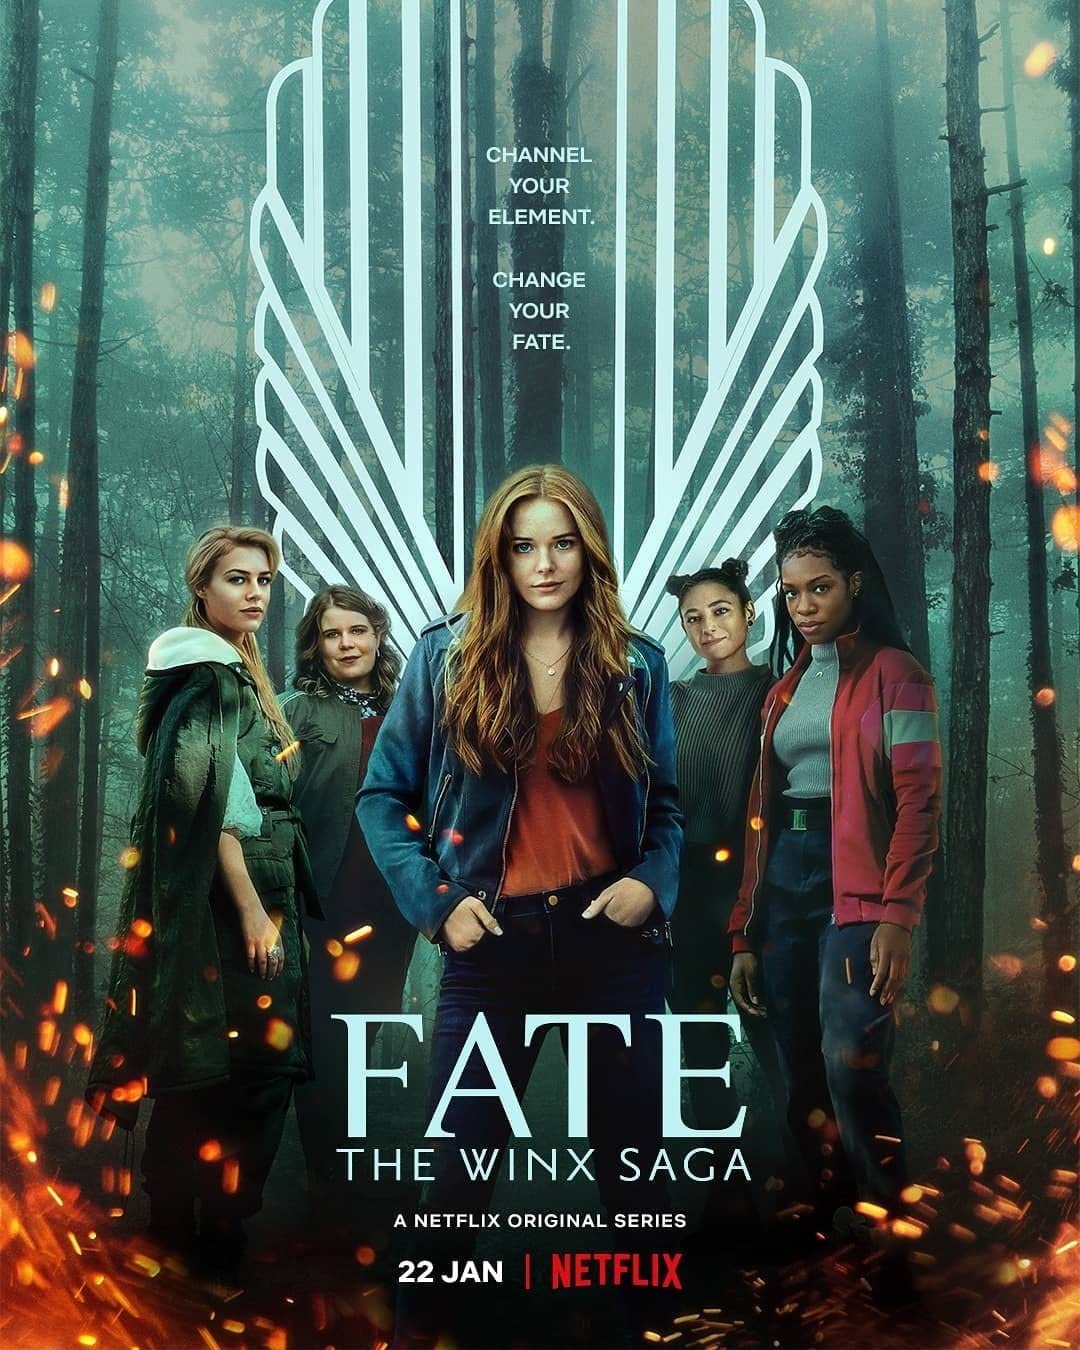 You are currently viewing Fate: The Winx Saga 2021 S01 Complete NetFlix Series Dual Audio Hindi+English 720p HDRip 1.6GB Download & Watch Online